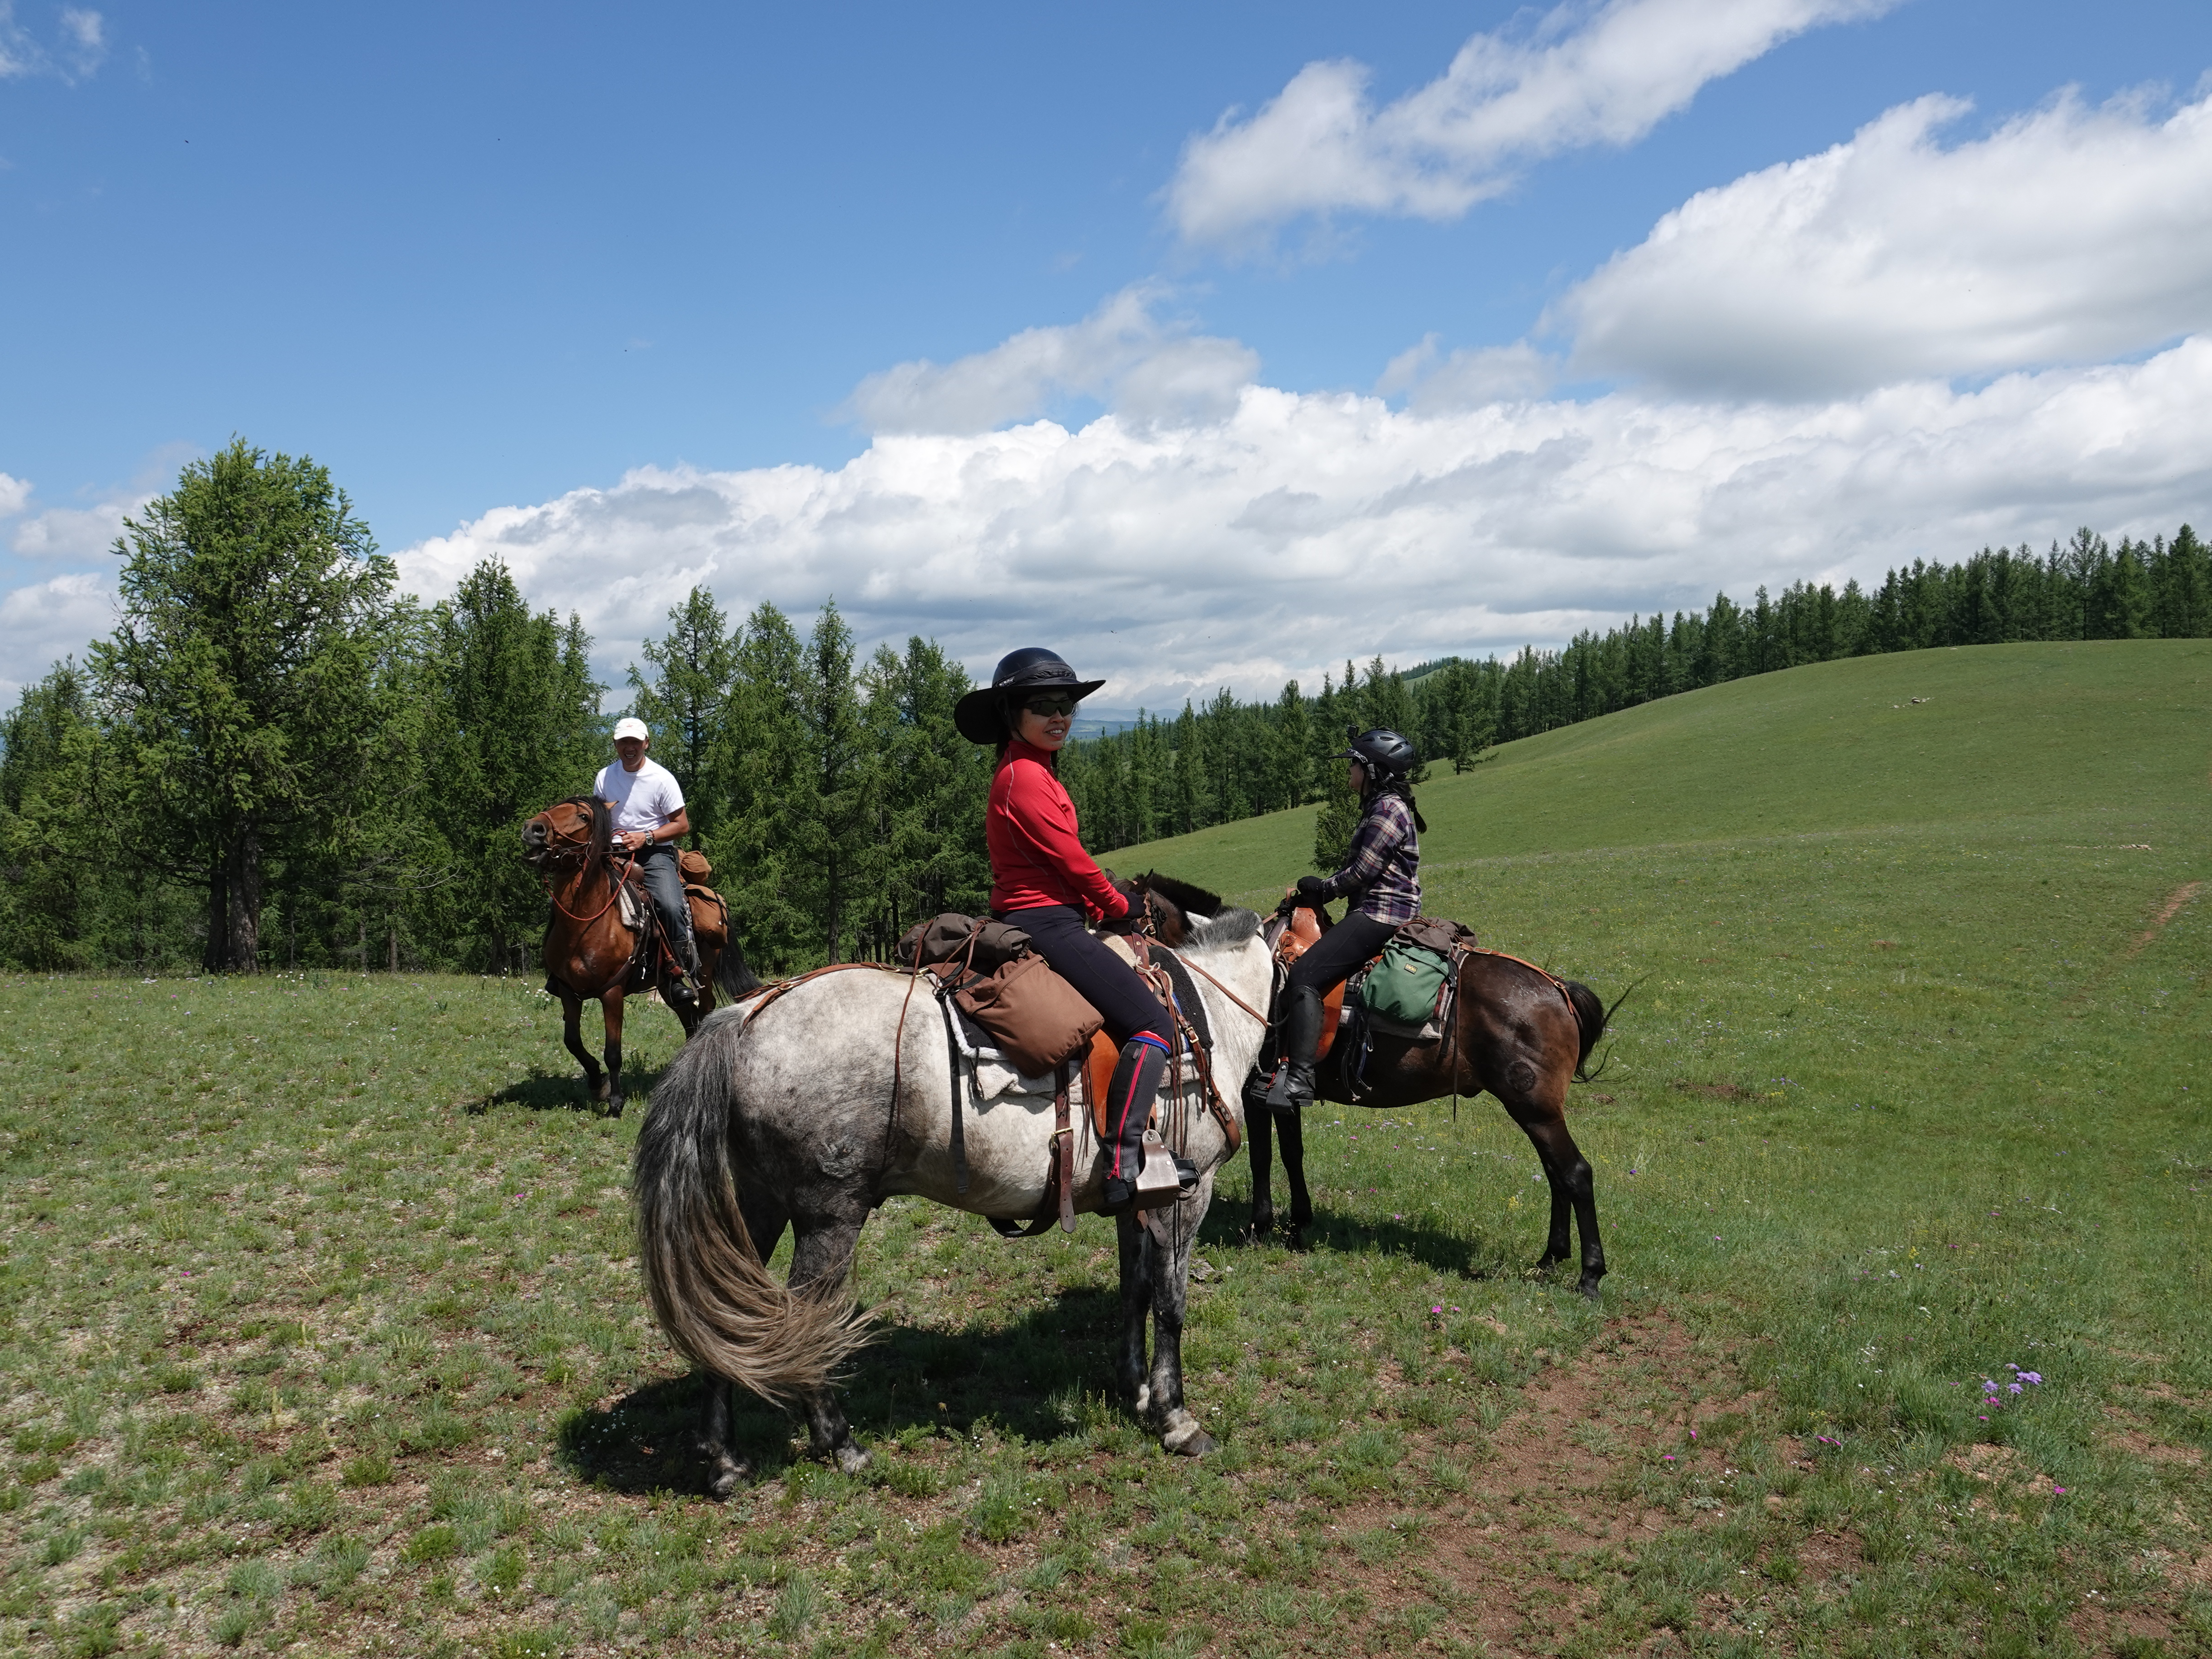 Horse Riding in Mongolia with Covid-19 precautions, Stone Horse Expeditions